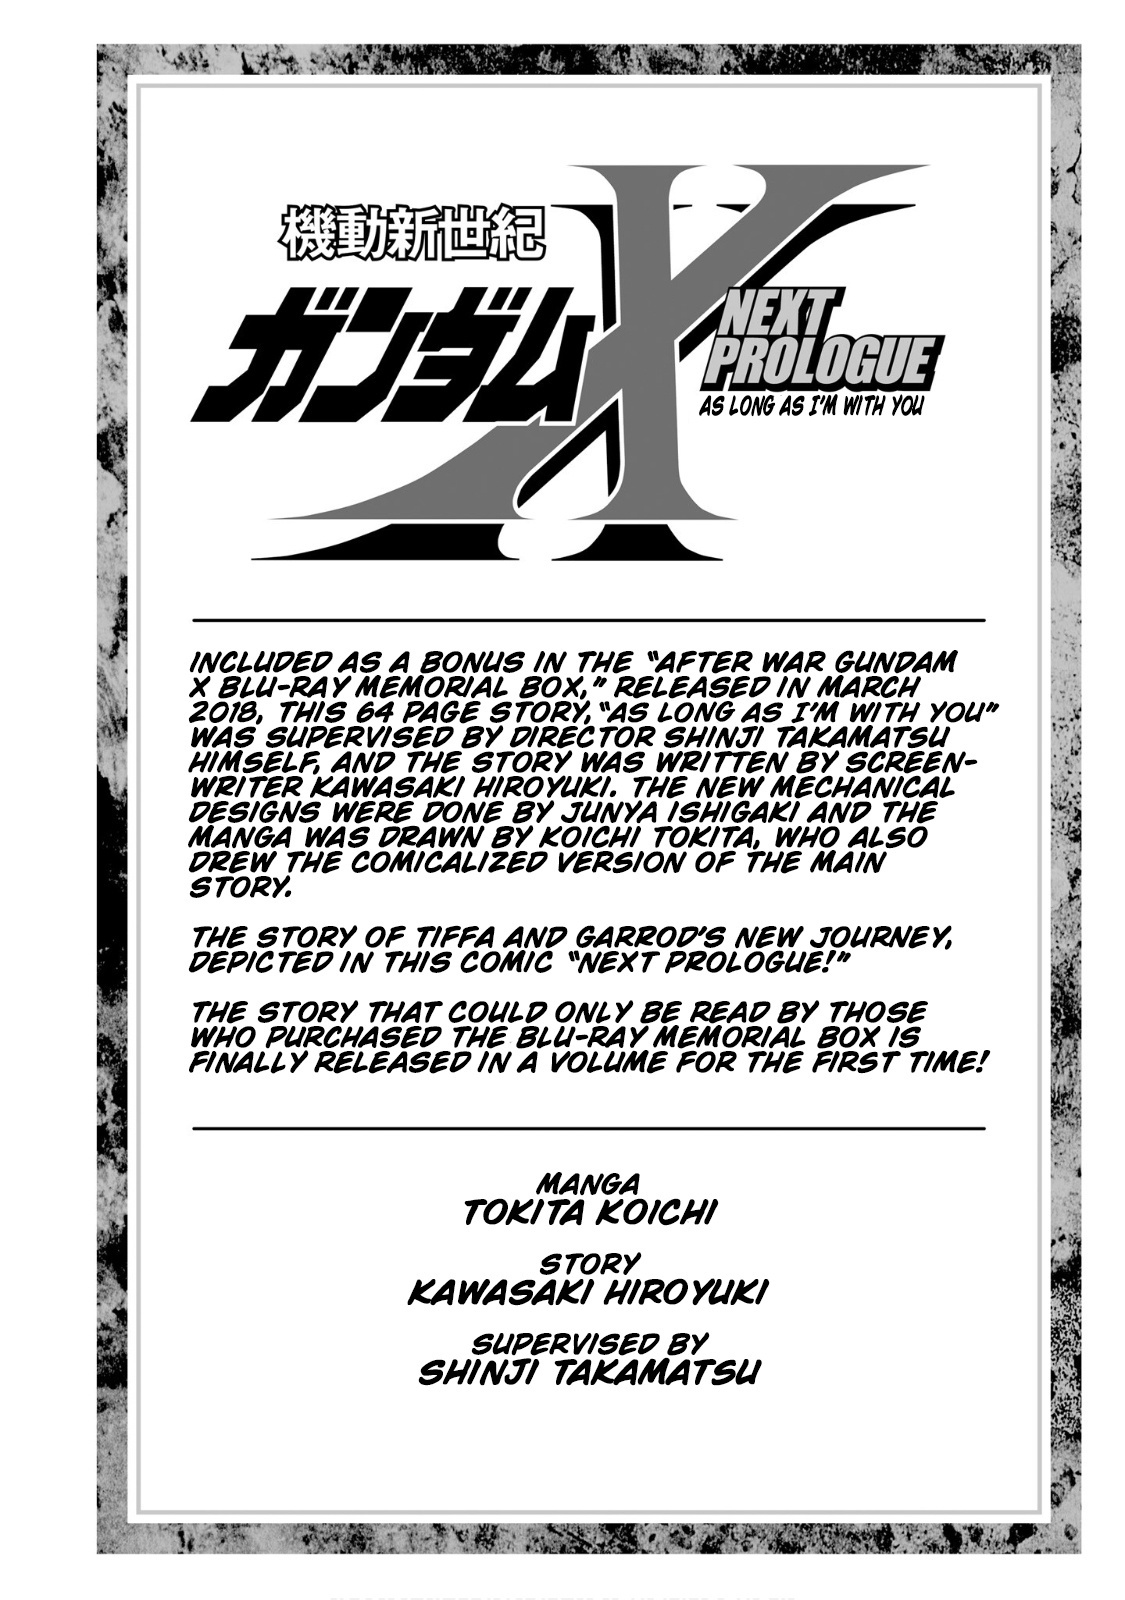 After War Gundam X Re:master Edition Vol.3 Chapter 10.5: Next Prologue - As Long As I'm With You - Picture 1